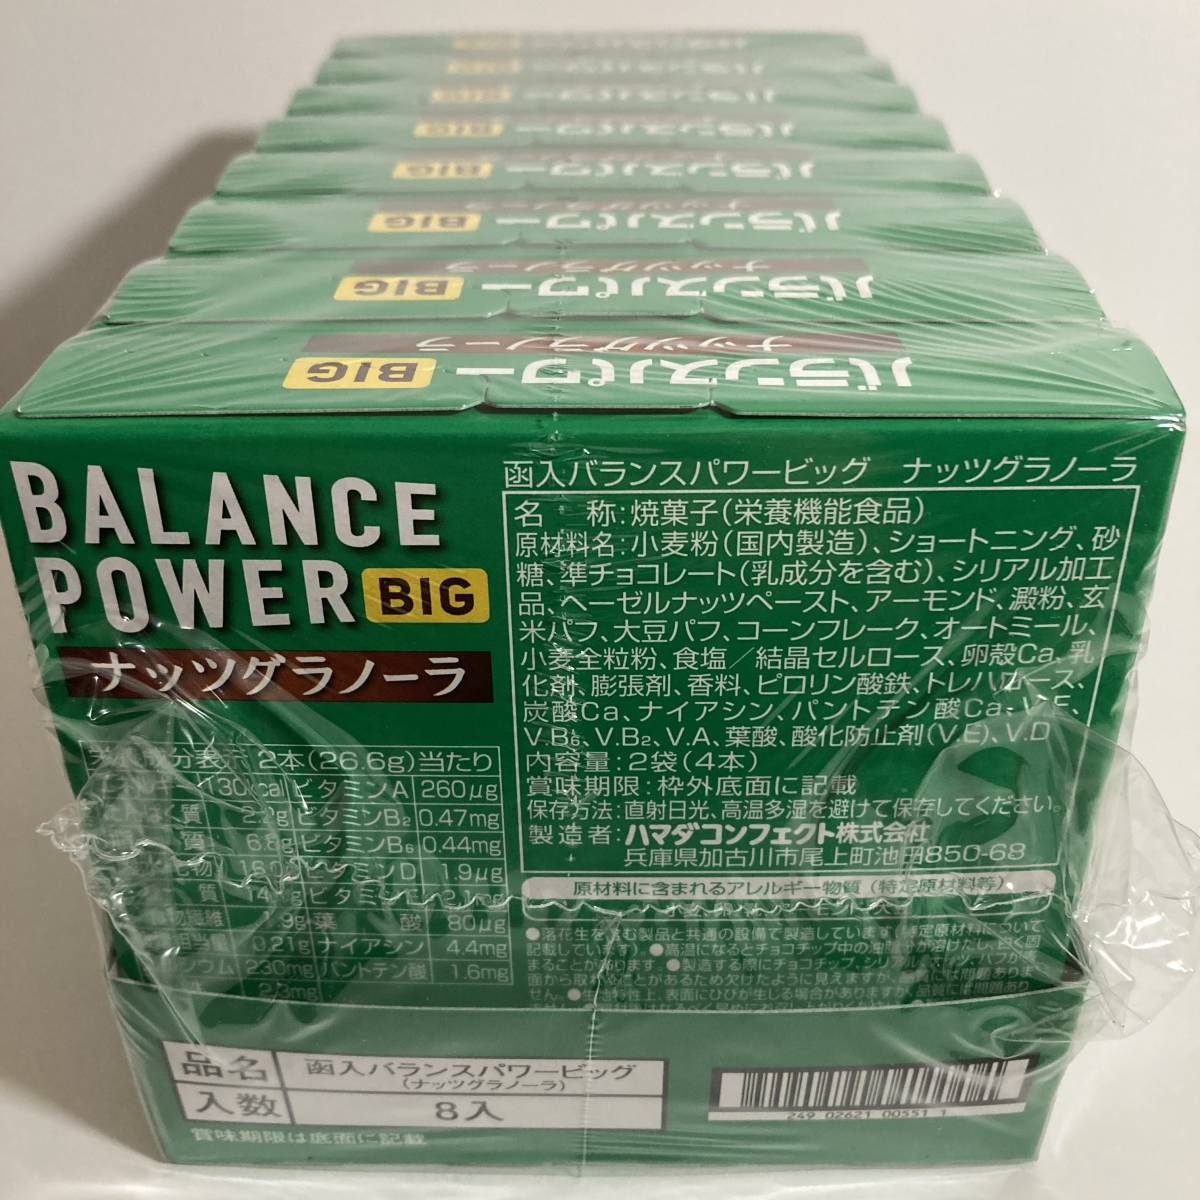  new goods * unopened goods * nutrition function food balance power big nuts glano-la8 box set (1 box 4 pcs insertion . total 3 2 ps )***